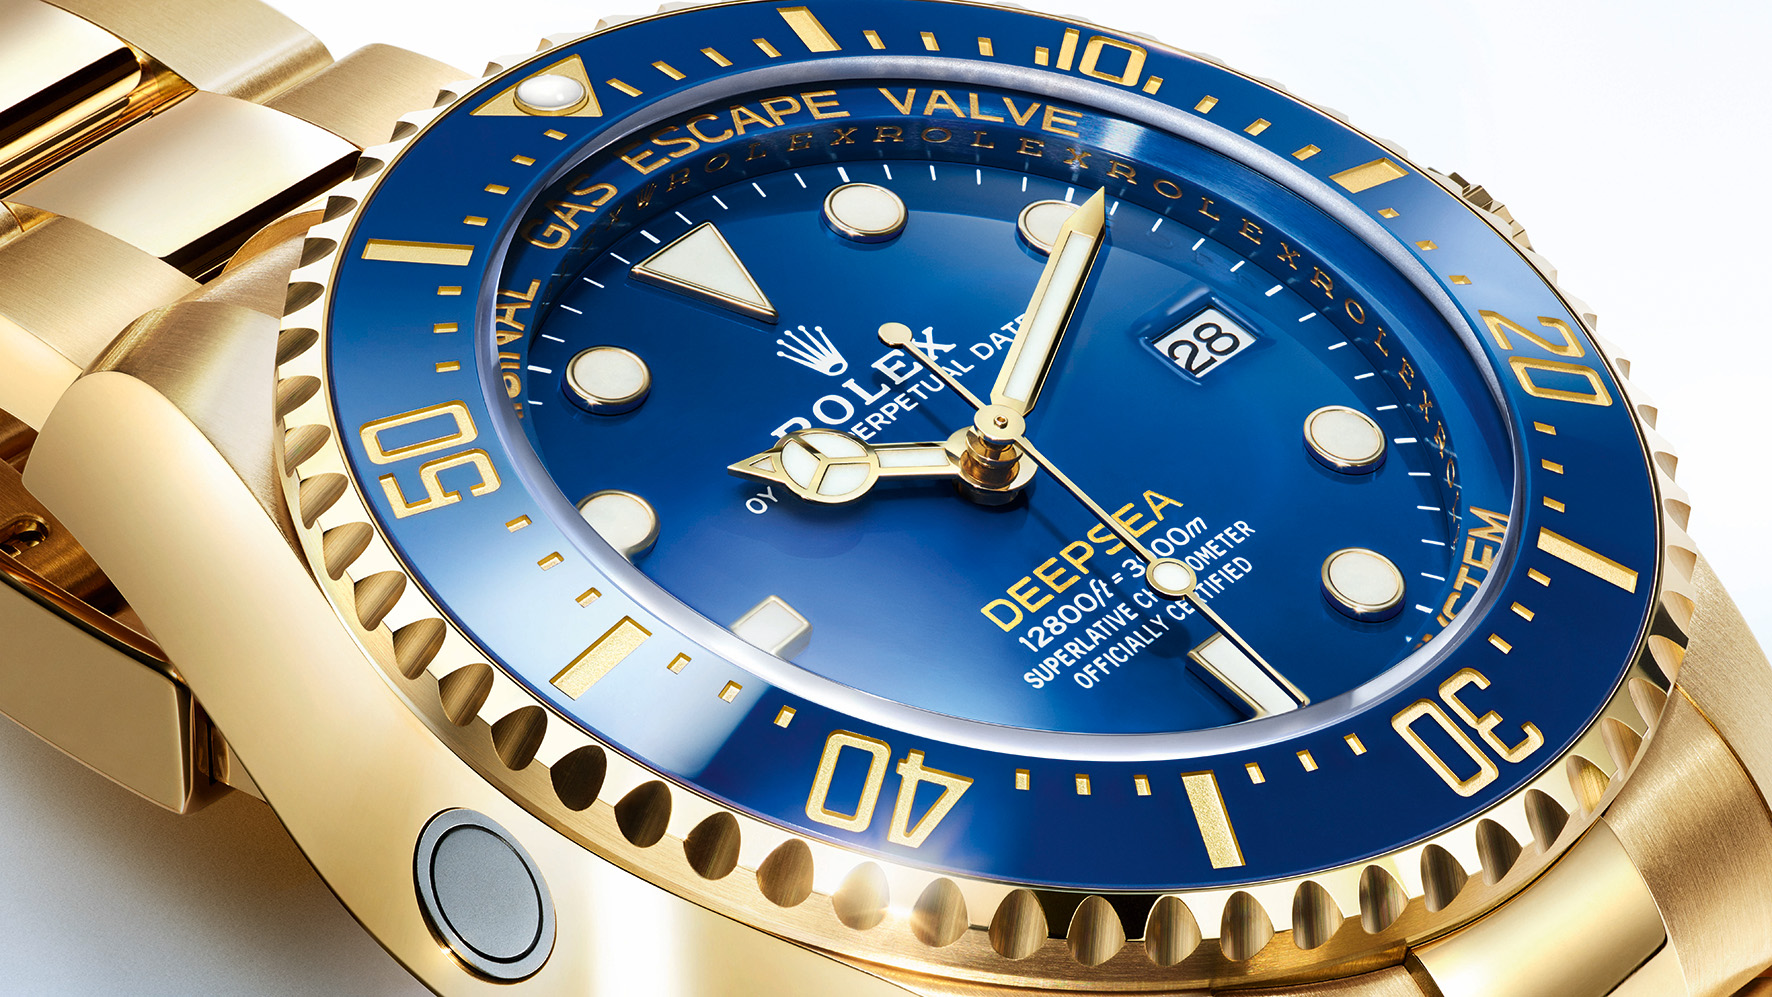 Helium valve of the Oyster Perpetual Rolex Deepsea